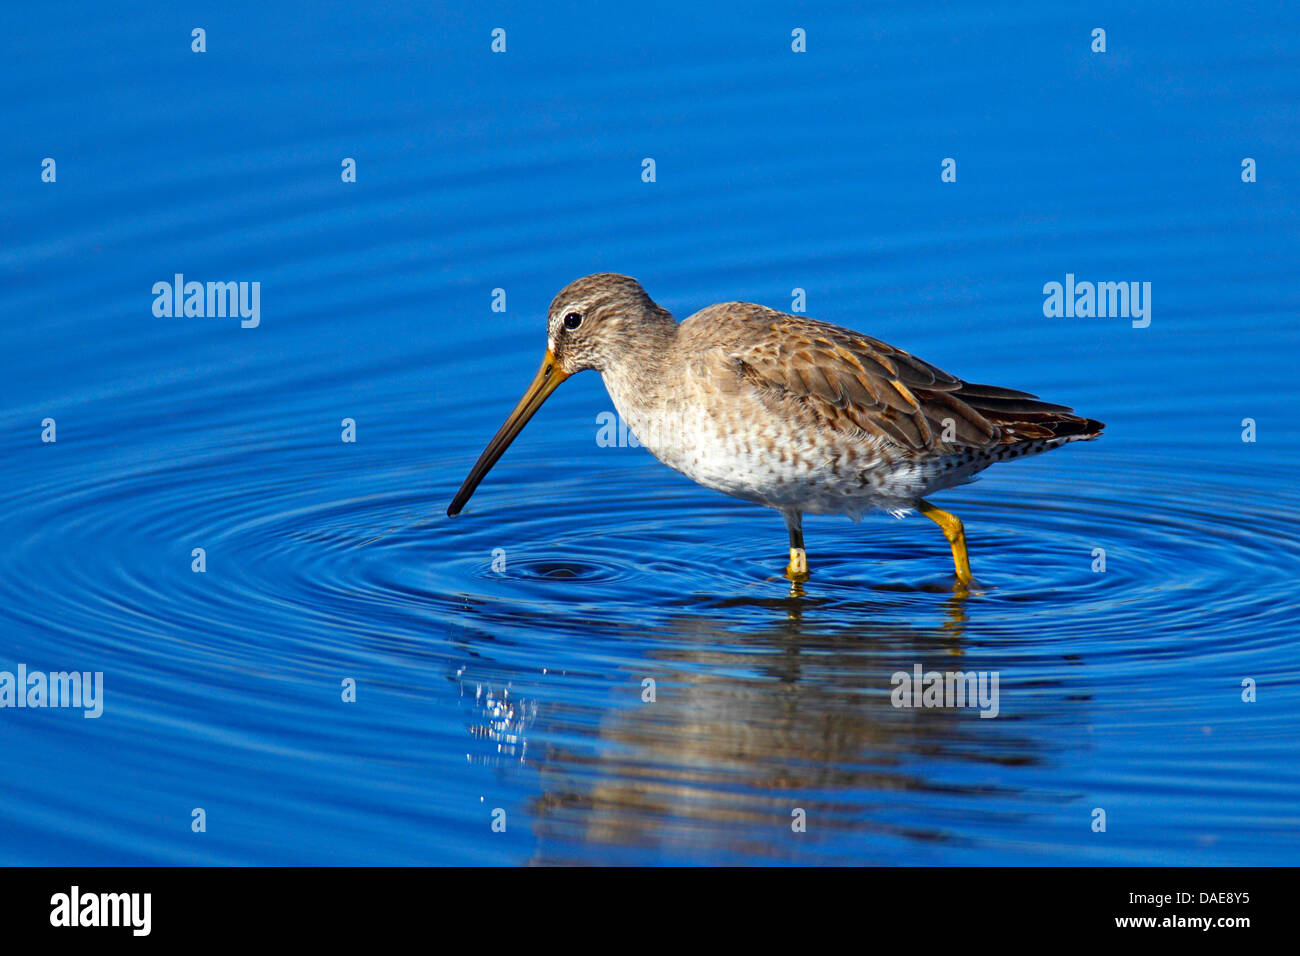 short-billed dowitcher (Limnodromus griseus), wading in shallow water looking for food, USA, Florida, Merritt Island Stock Photo